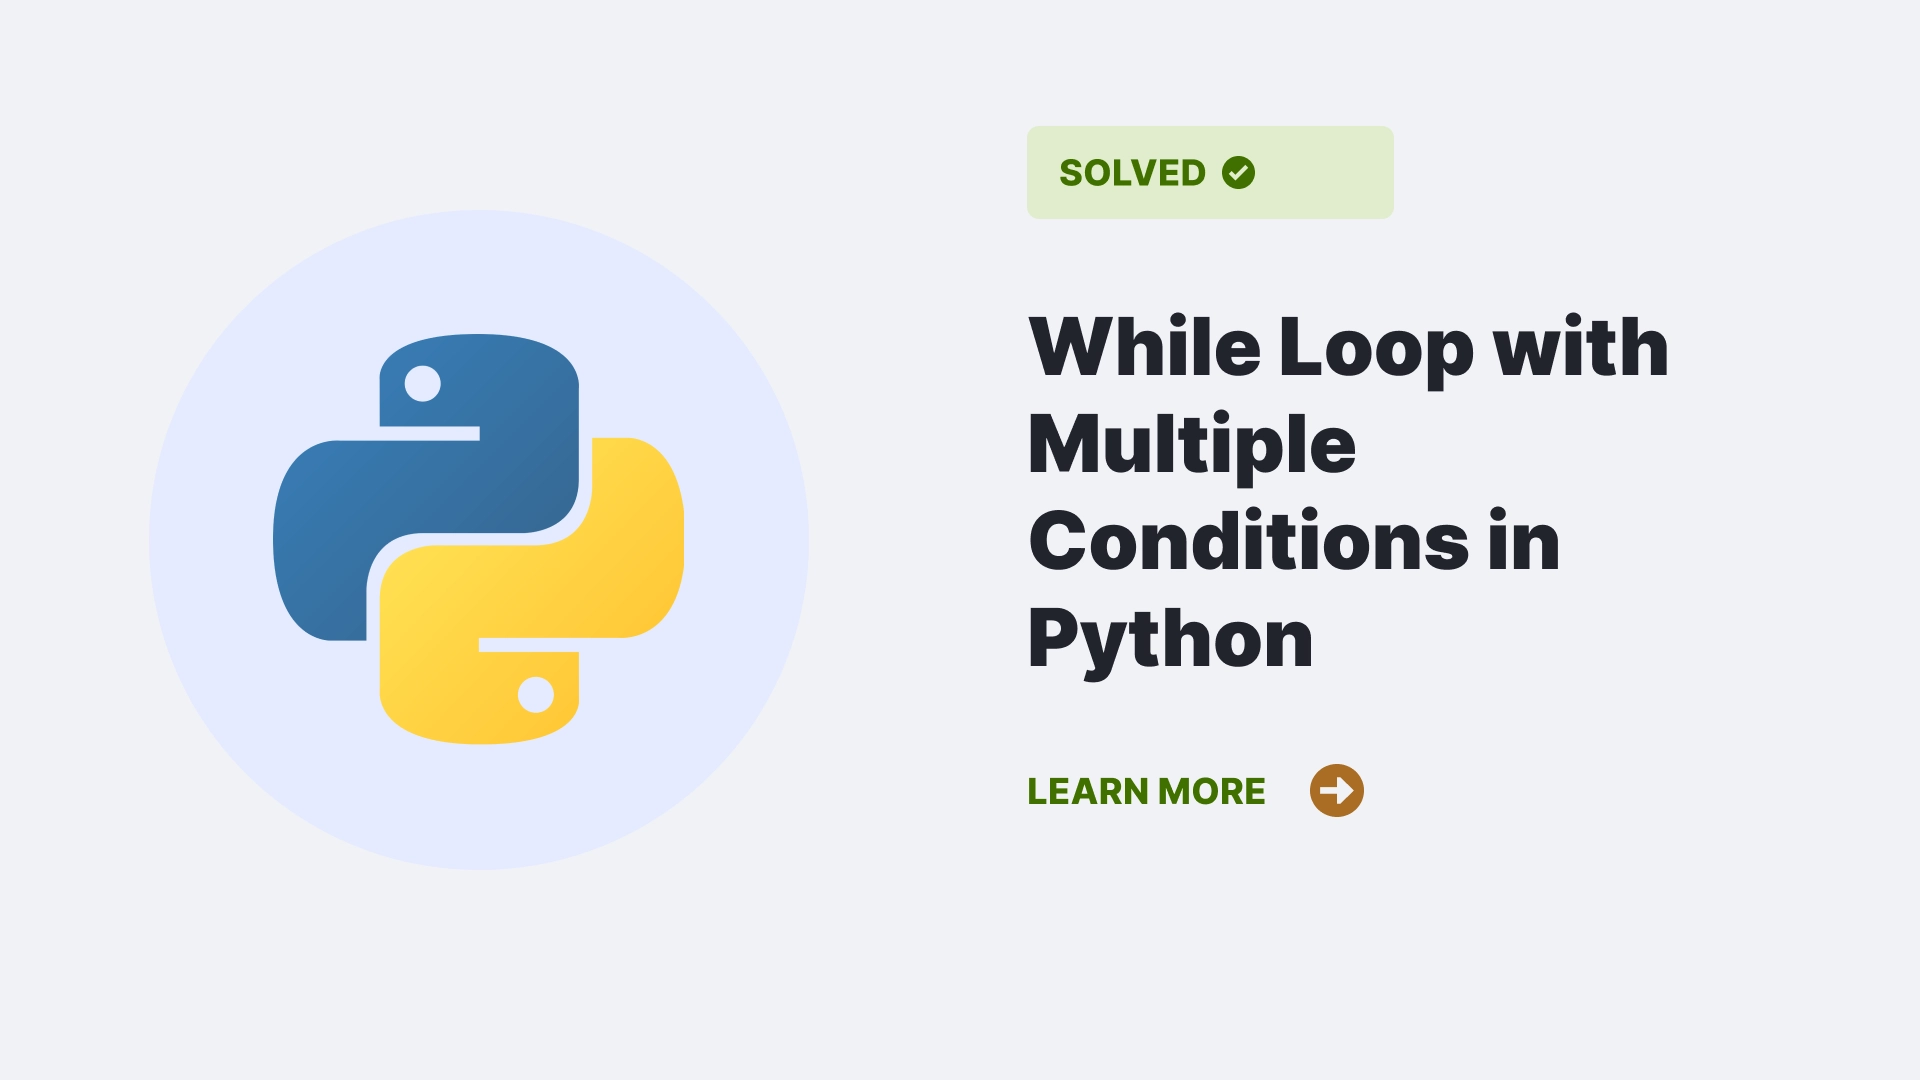 While Loop with Multiple Conditions in Python